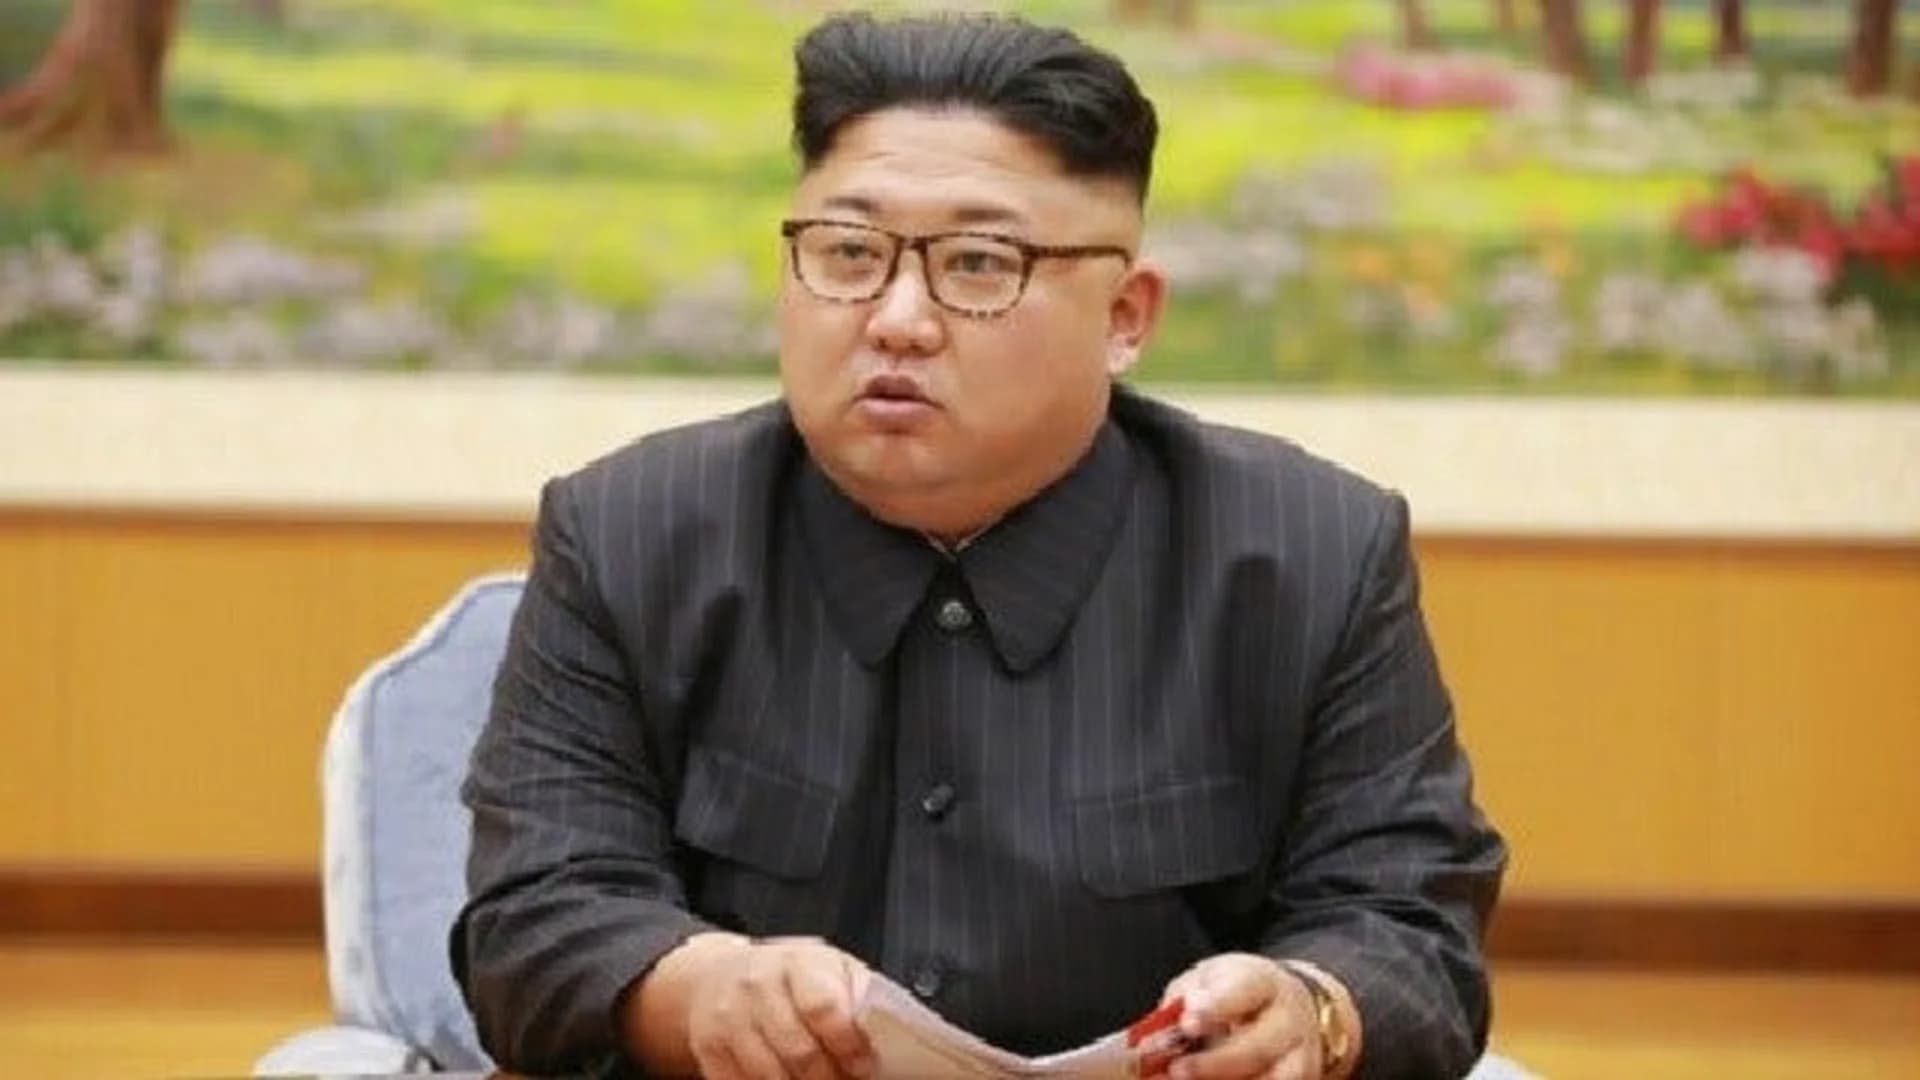 Kim Jong Un fires off insults at Trump, hints at weapons test